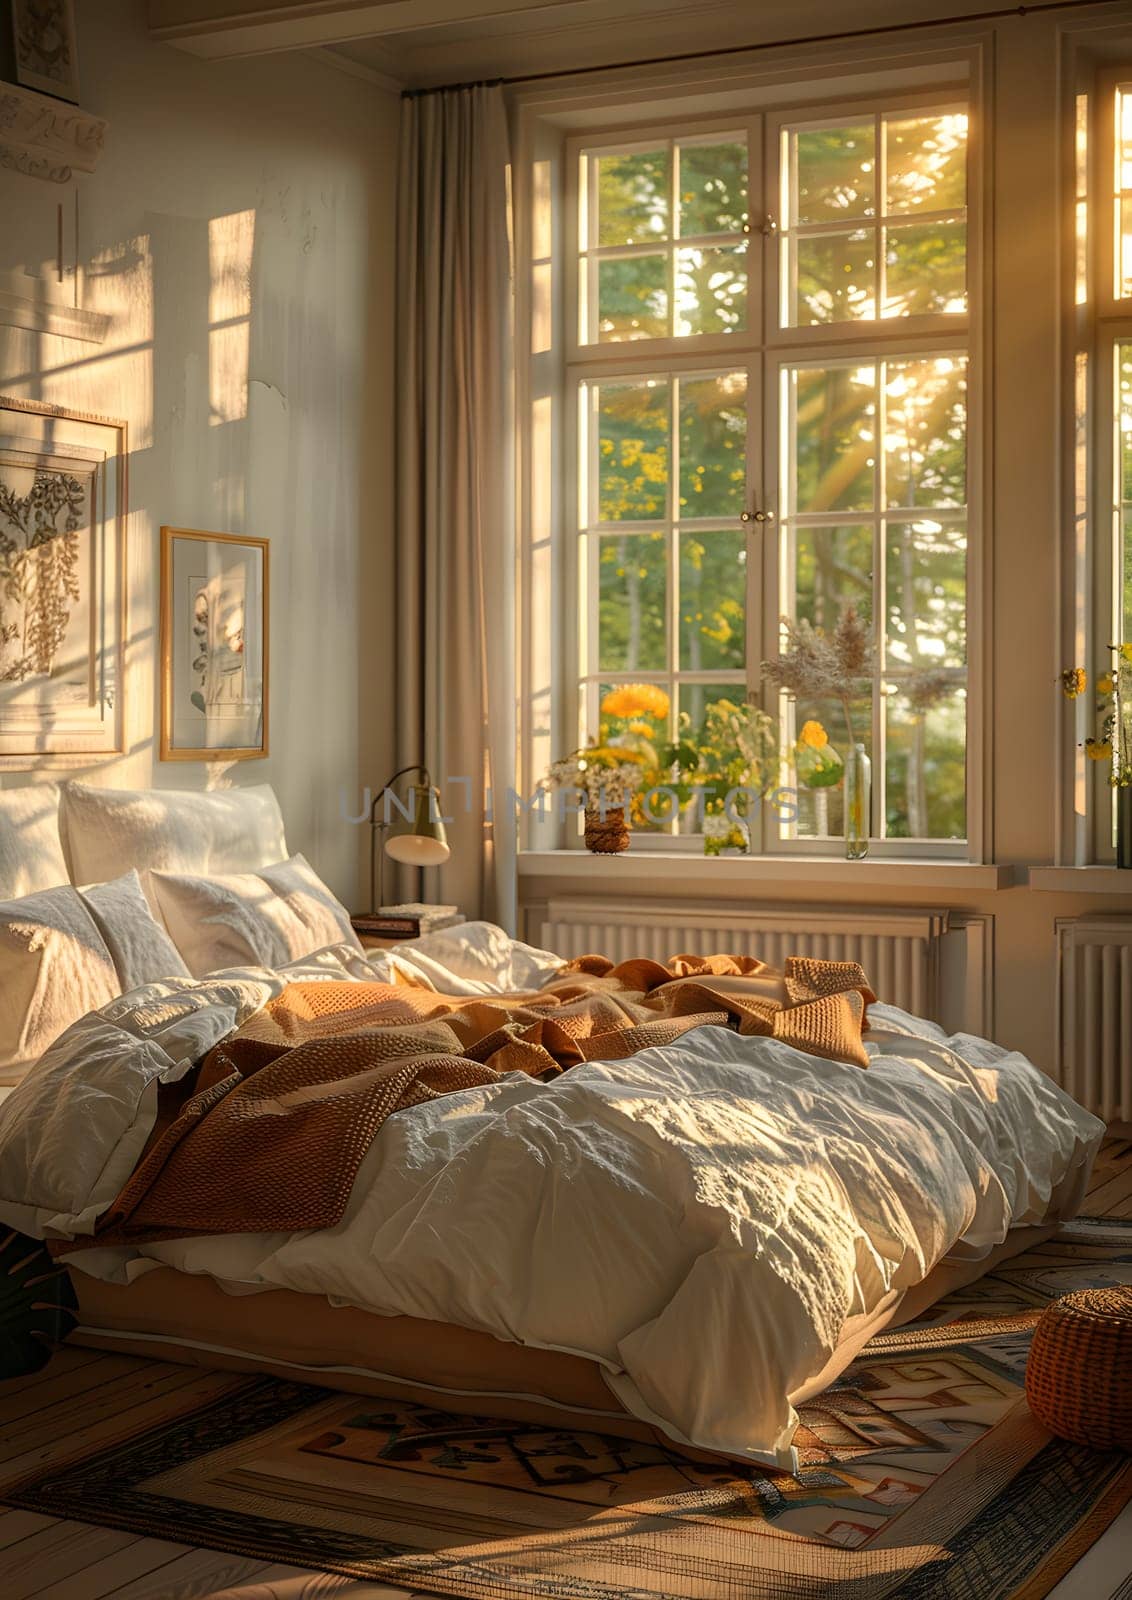 A bedroom with hardwood flooring and a window letting in sunlight. The room is designed for comfort with shades providing a cozy atmosphere